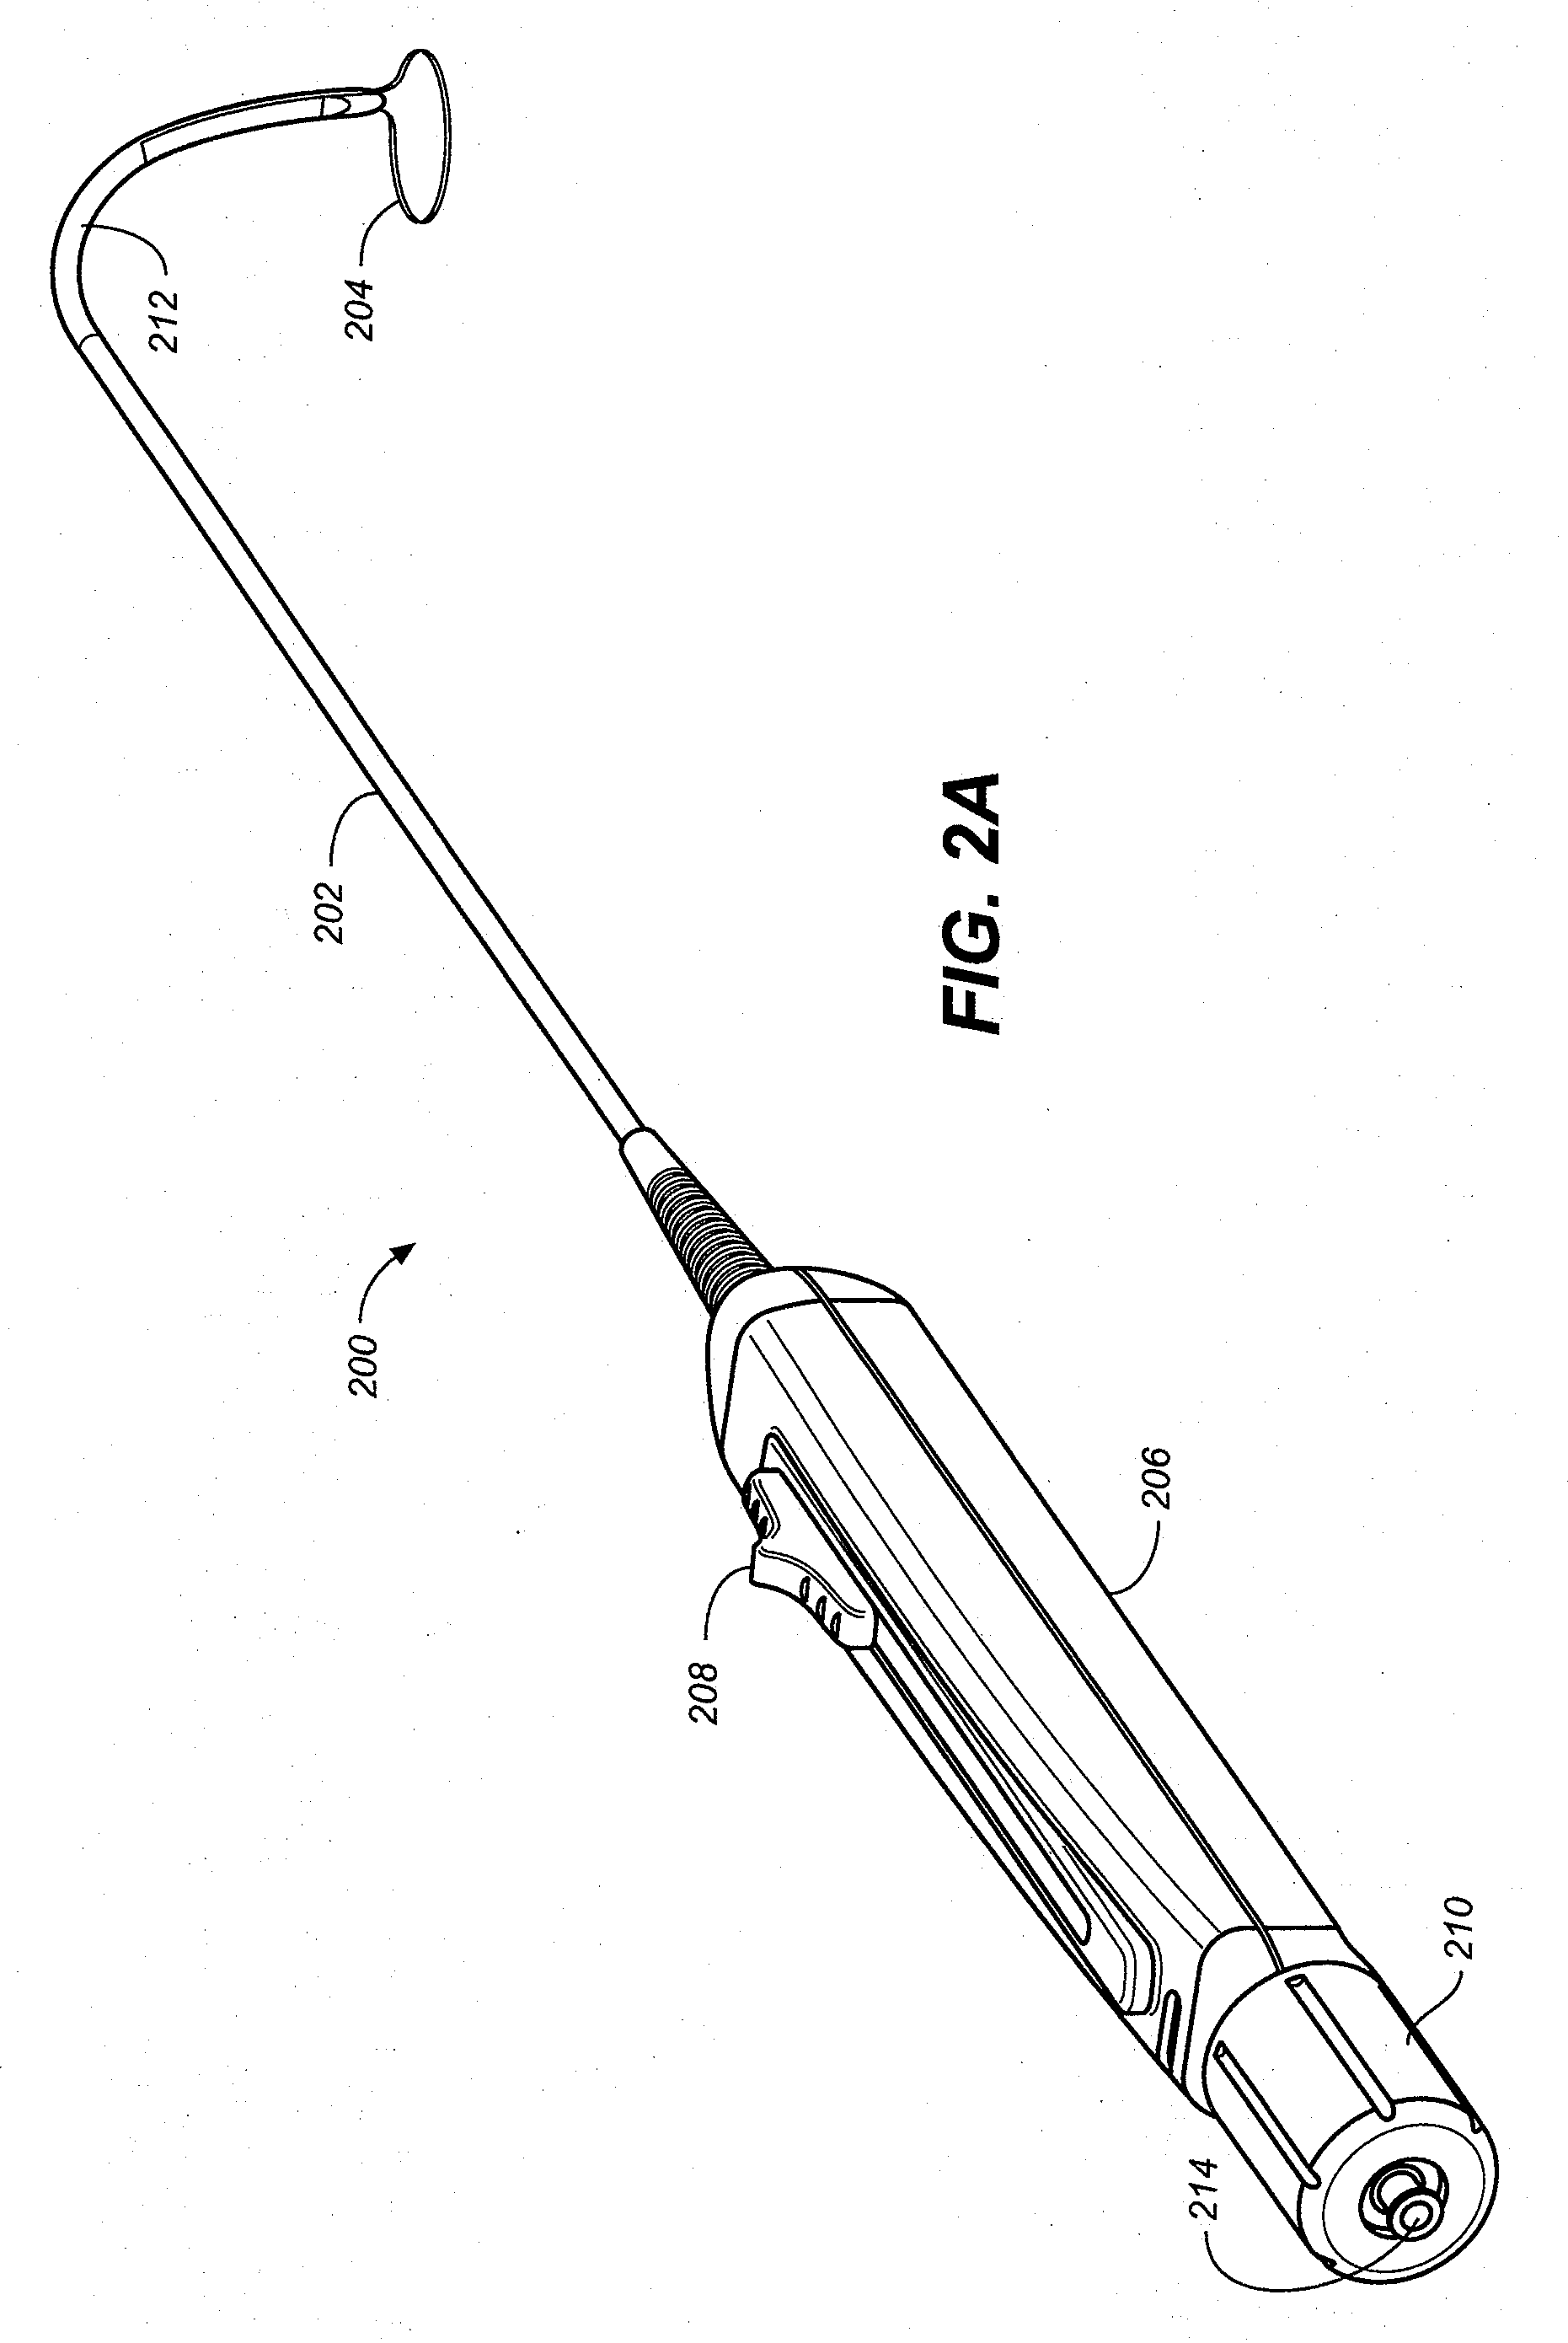 Devices, systems, and methods for closing the left atrial appendage